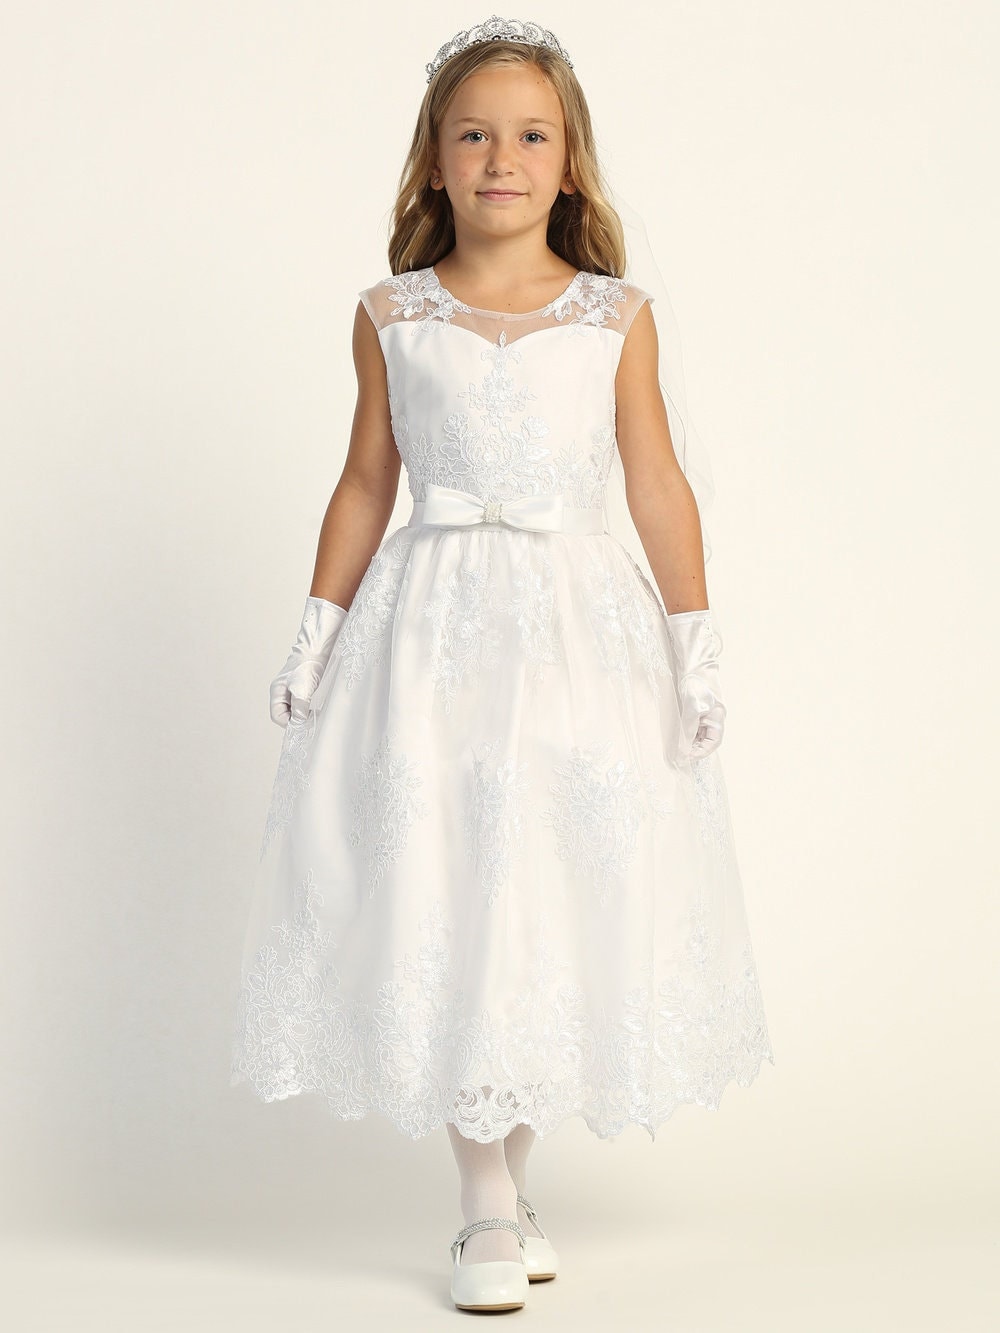 A girl wearing an exquisite white First Communion Dress with corded embroidered tulle and sequins, featuring a bow accent on the waist. (This is the actual image from the listing)